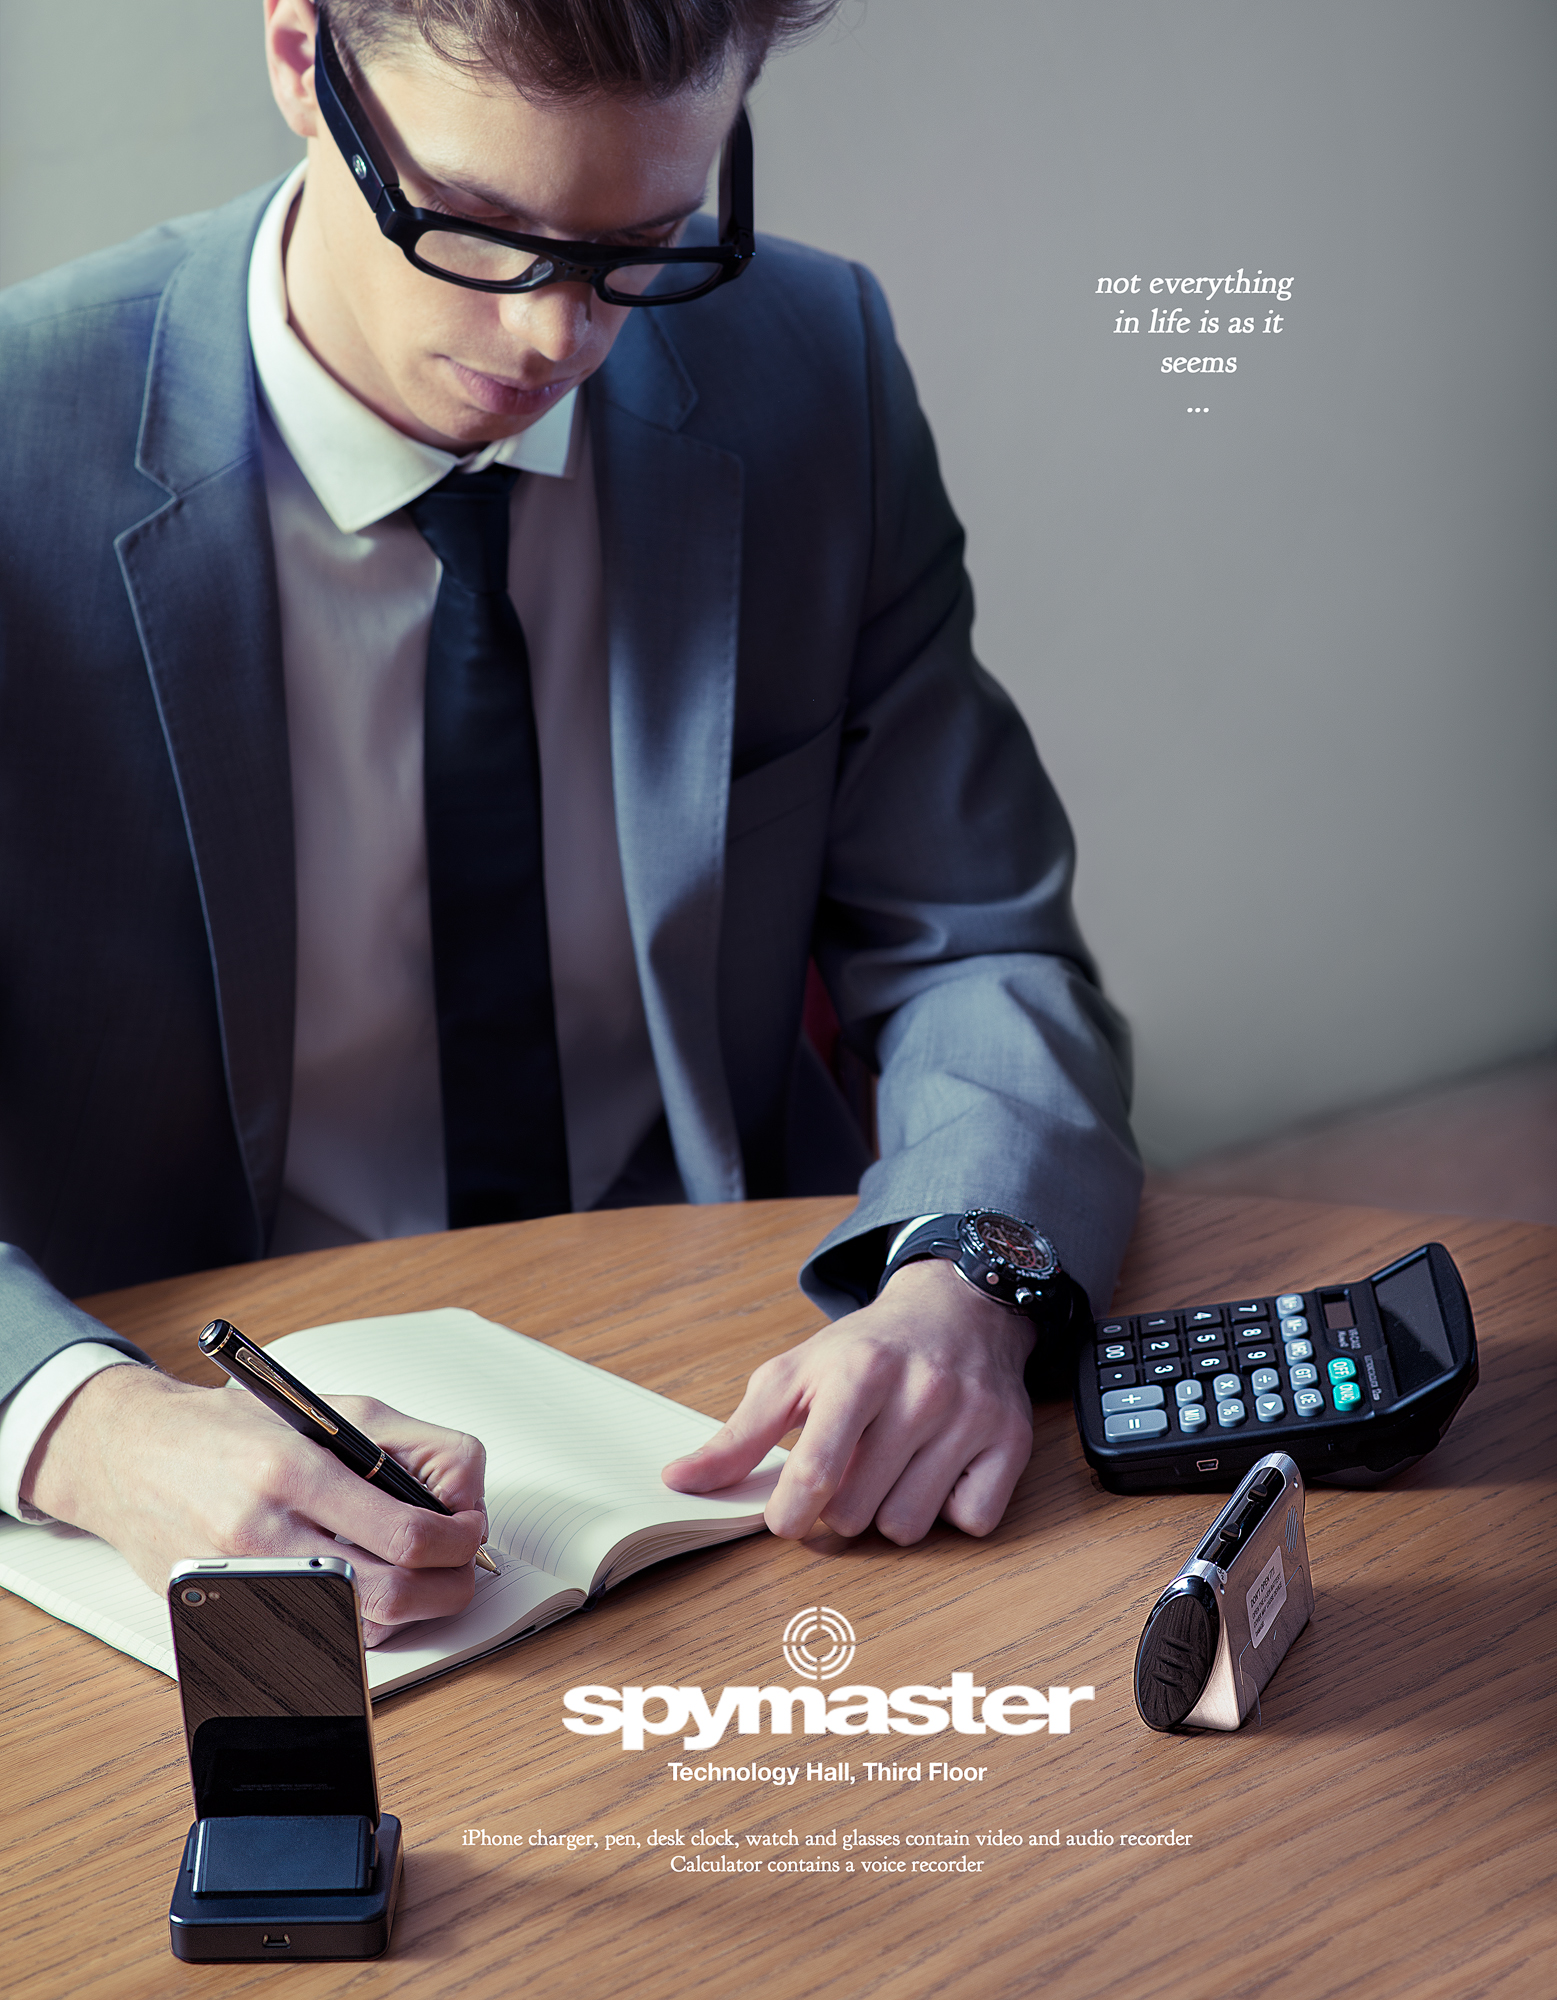 Spymaster Ad Campaign